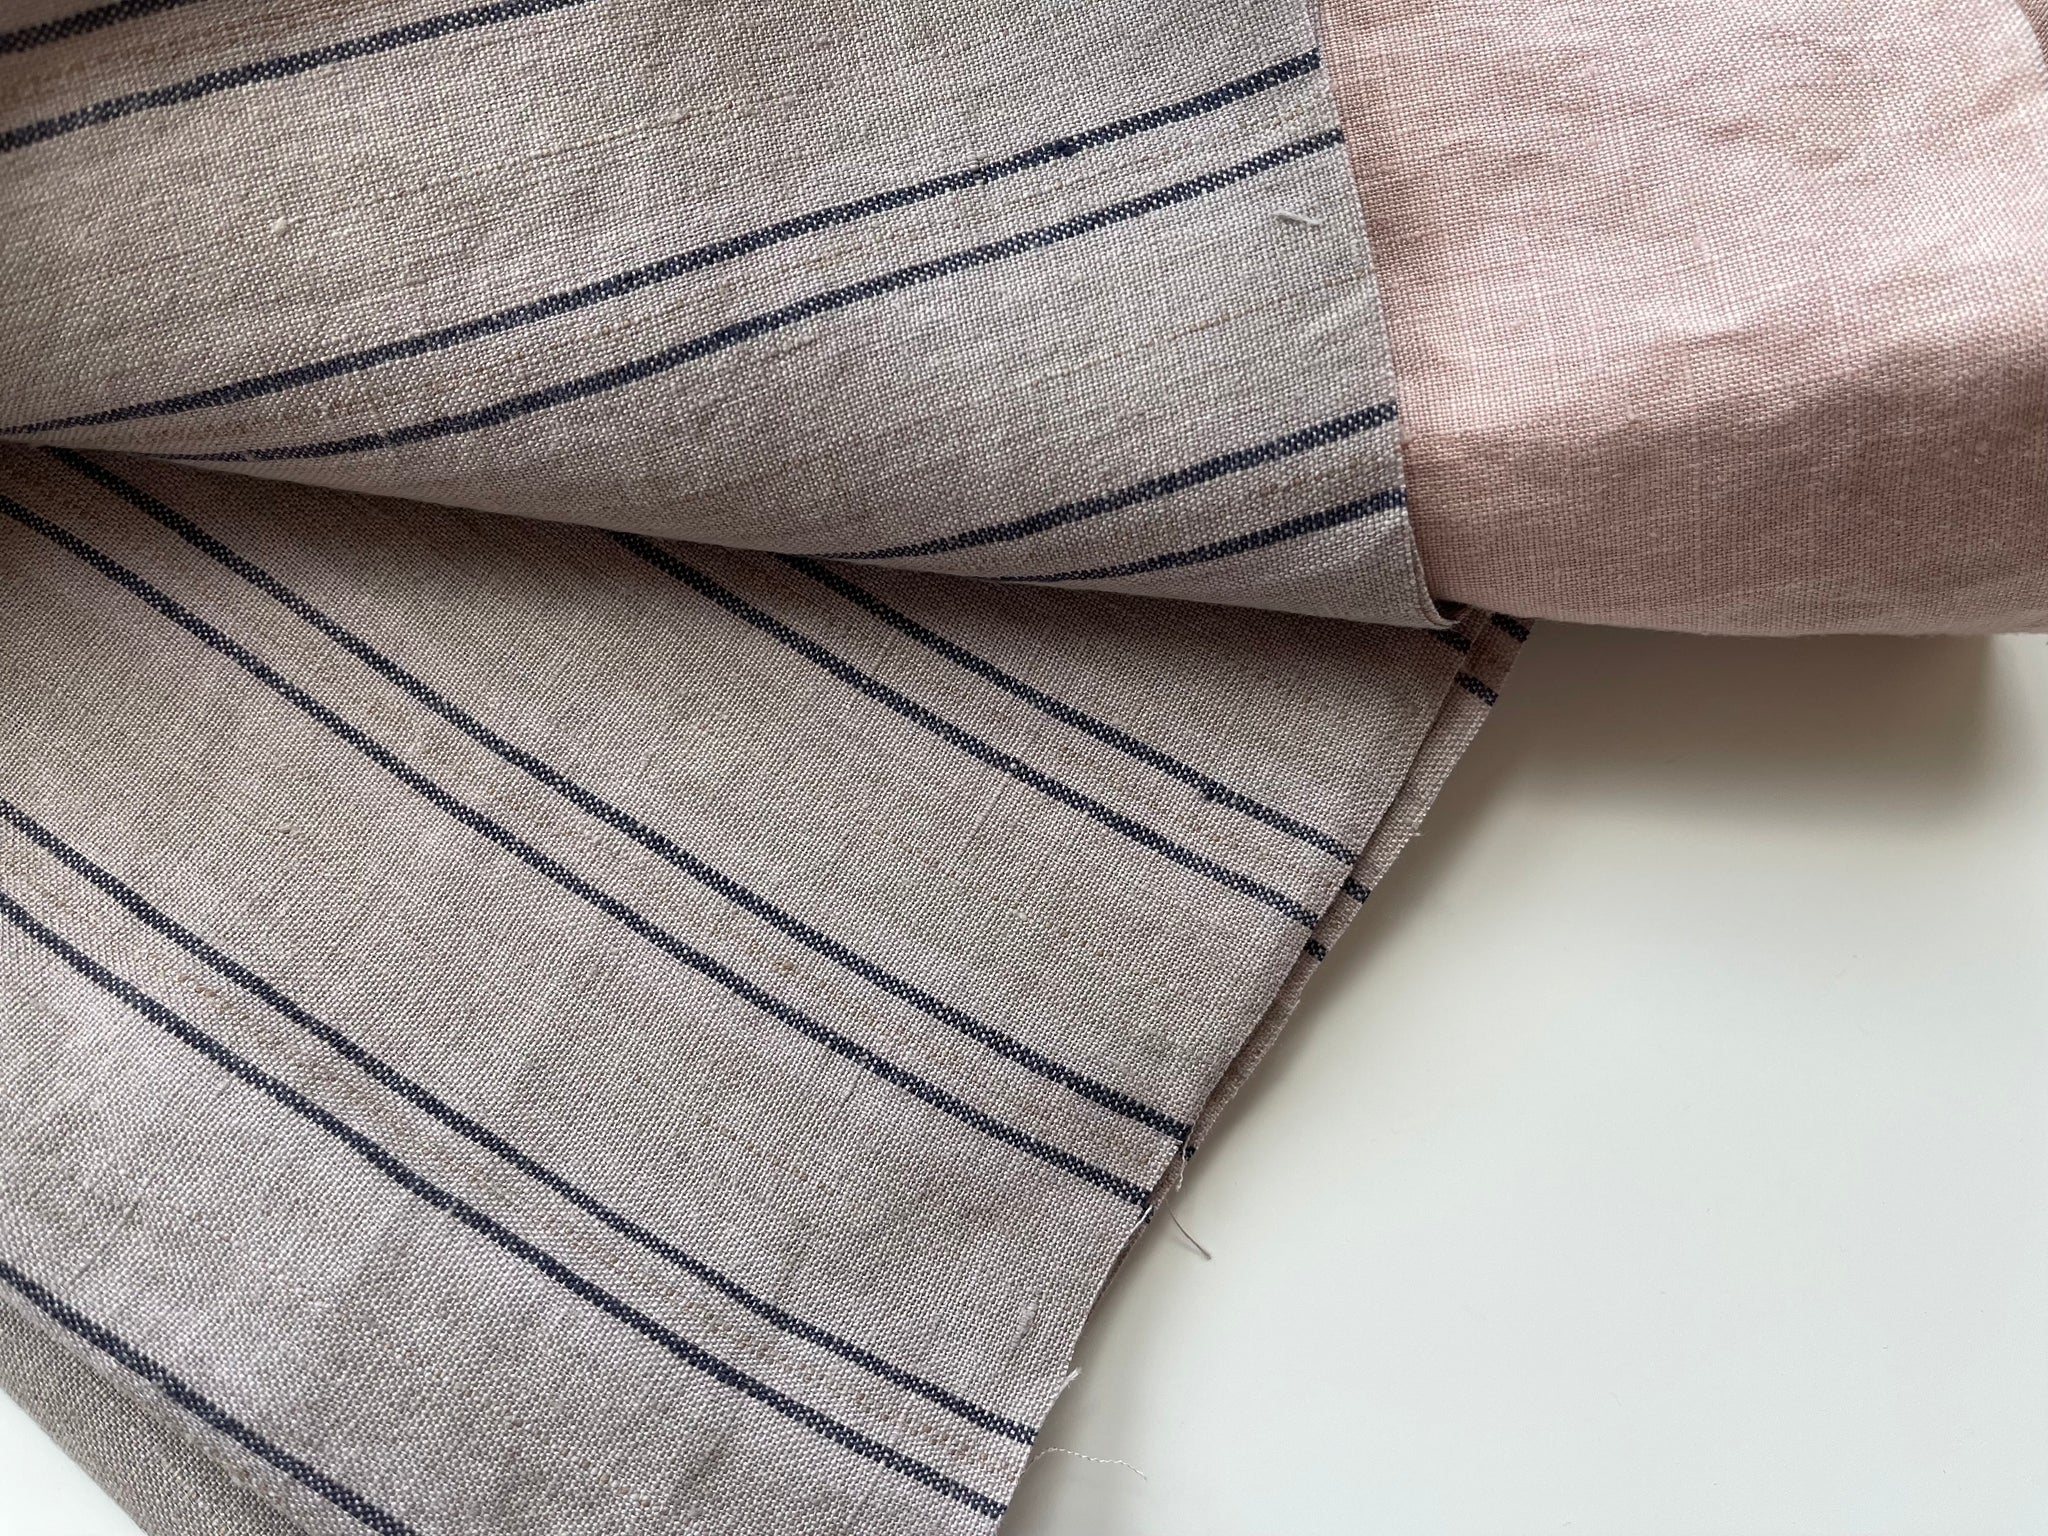 Linen Fabric Remnants - Mocca Stripes and Dusty Rose